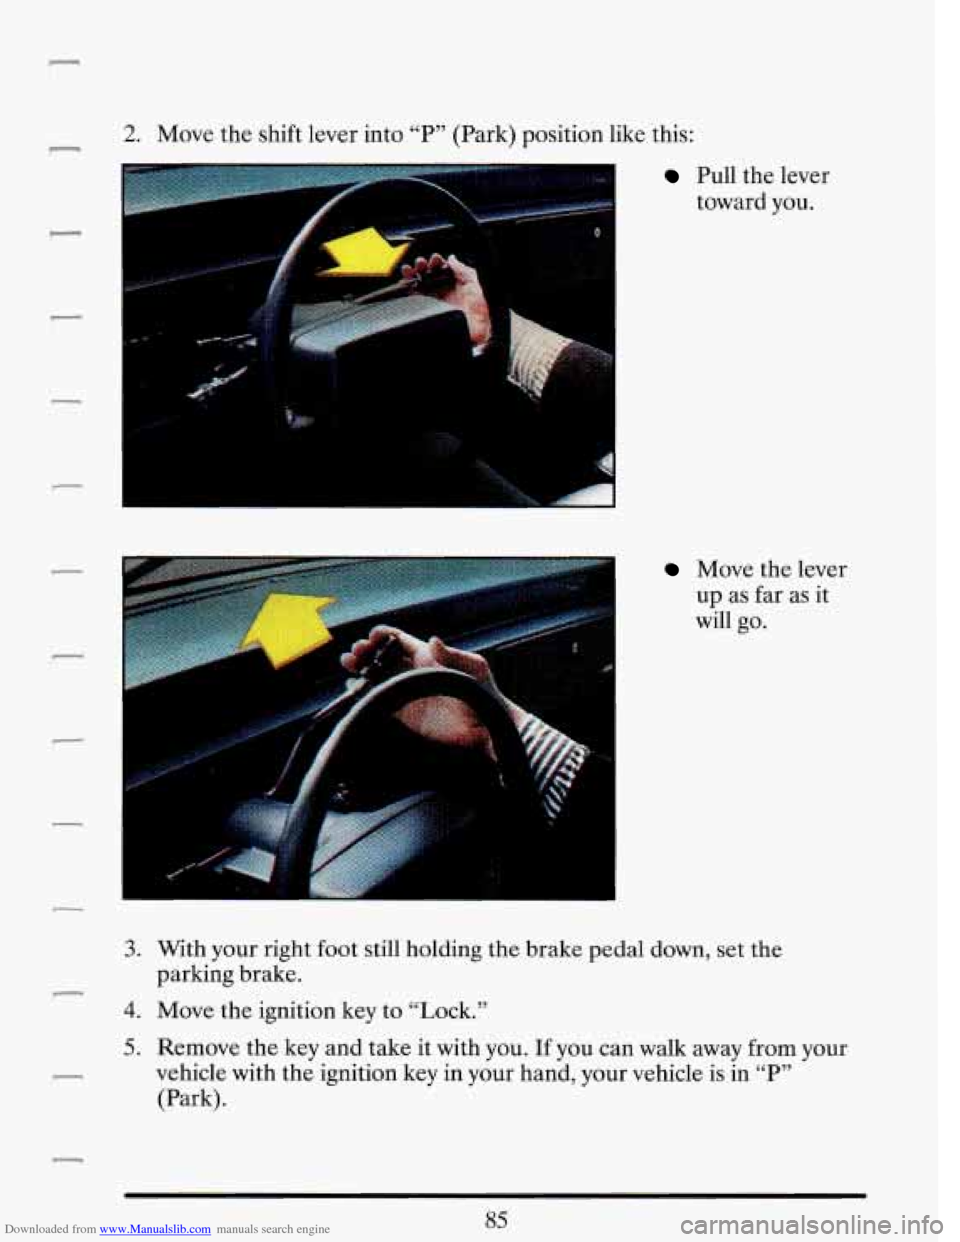 CADILLAC DEVILLE 1993 7.G Owners Manual Downloaded from www.Manualslib.com manuals search engine 2. Move the shift lever  into “P” (Park) position like this: - 
f 1 
Pull  the lever 
toward  you. 
Move the lever 
up  as far  as it 
will